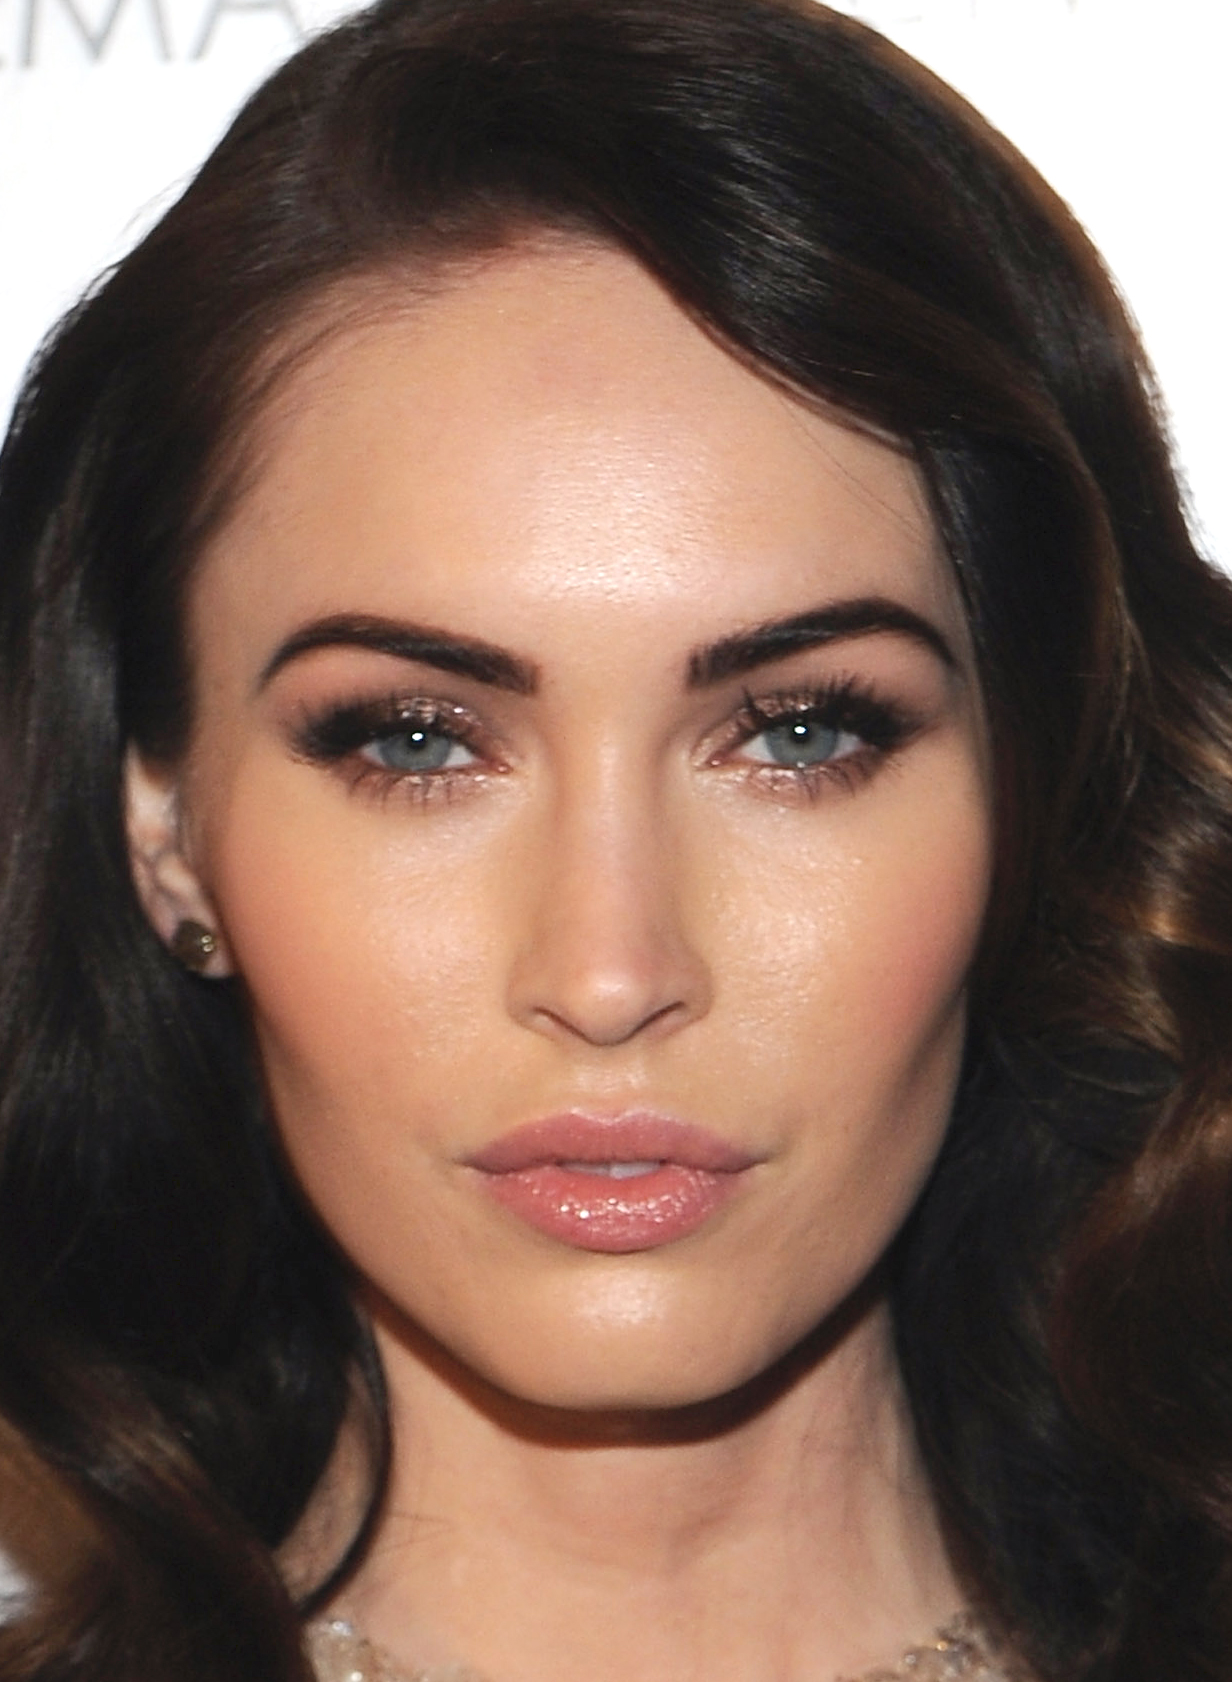 Megan Fox Plastic Surgery: Has She Gone Under the Knife? | Life & Style